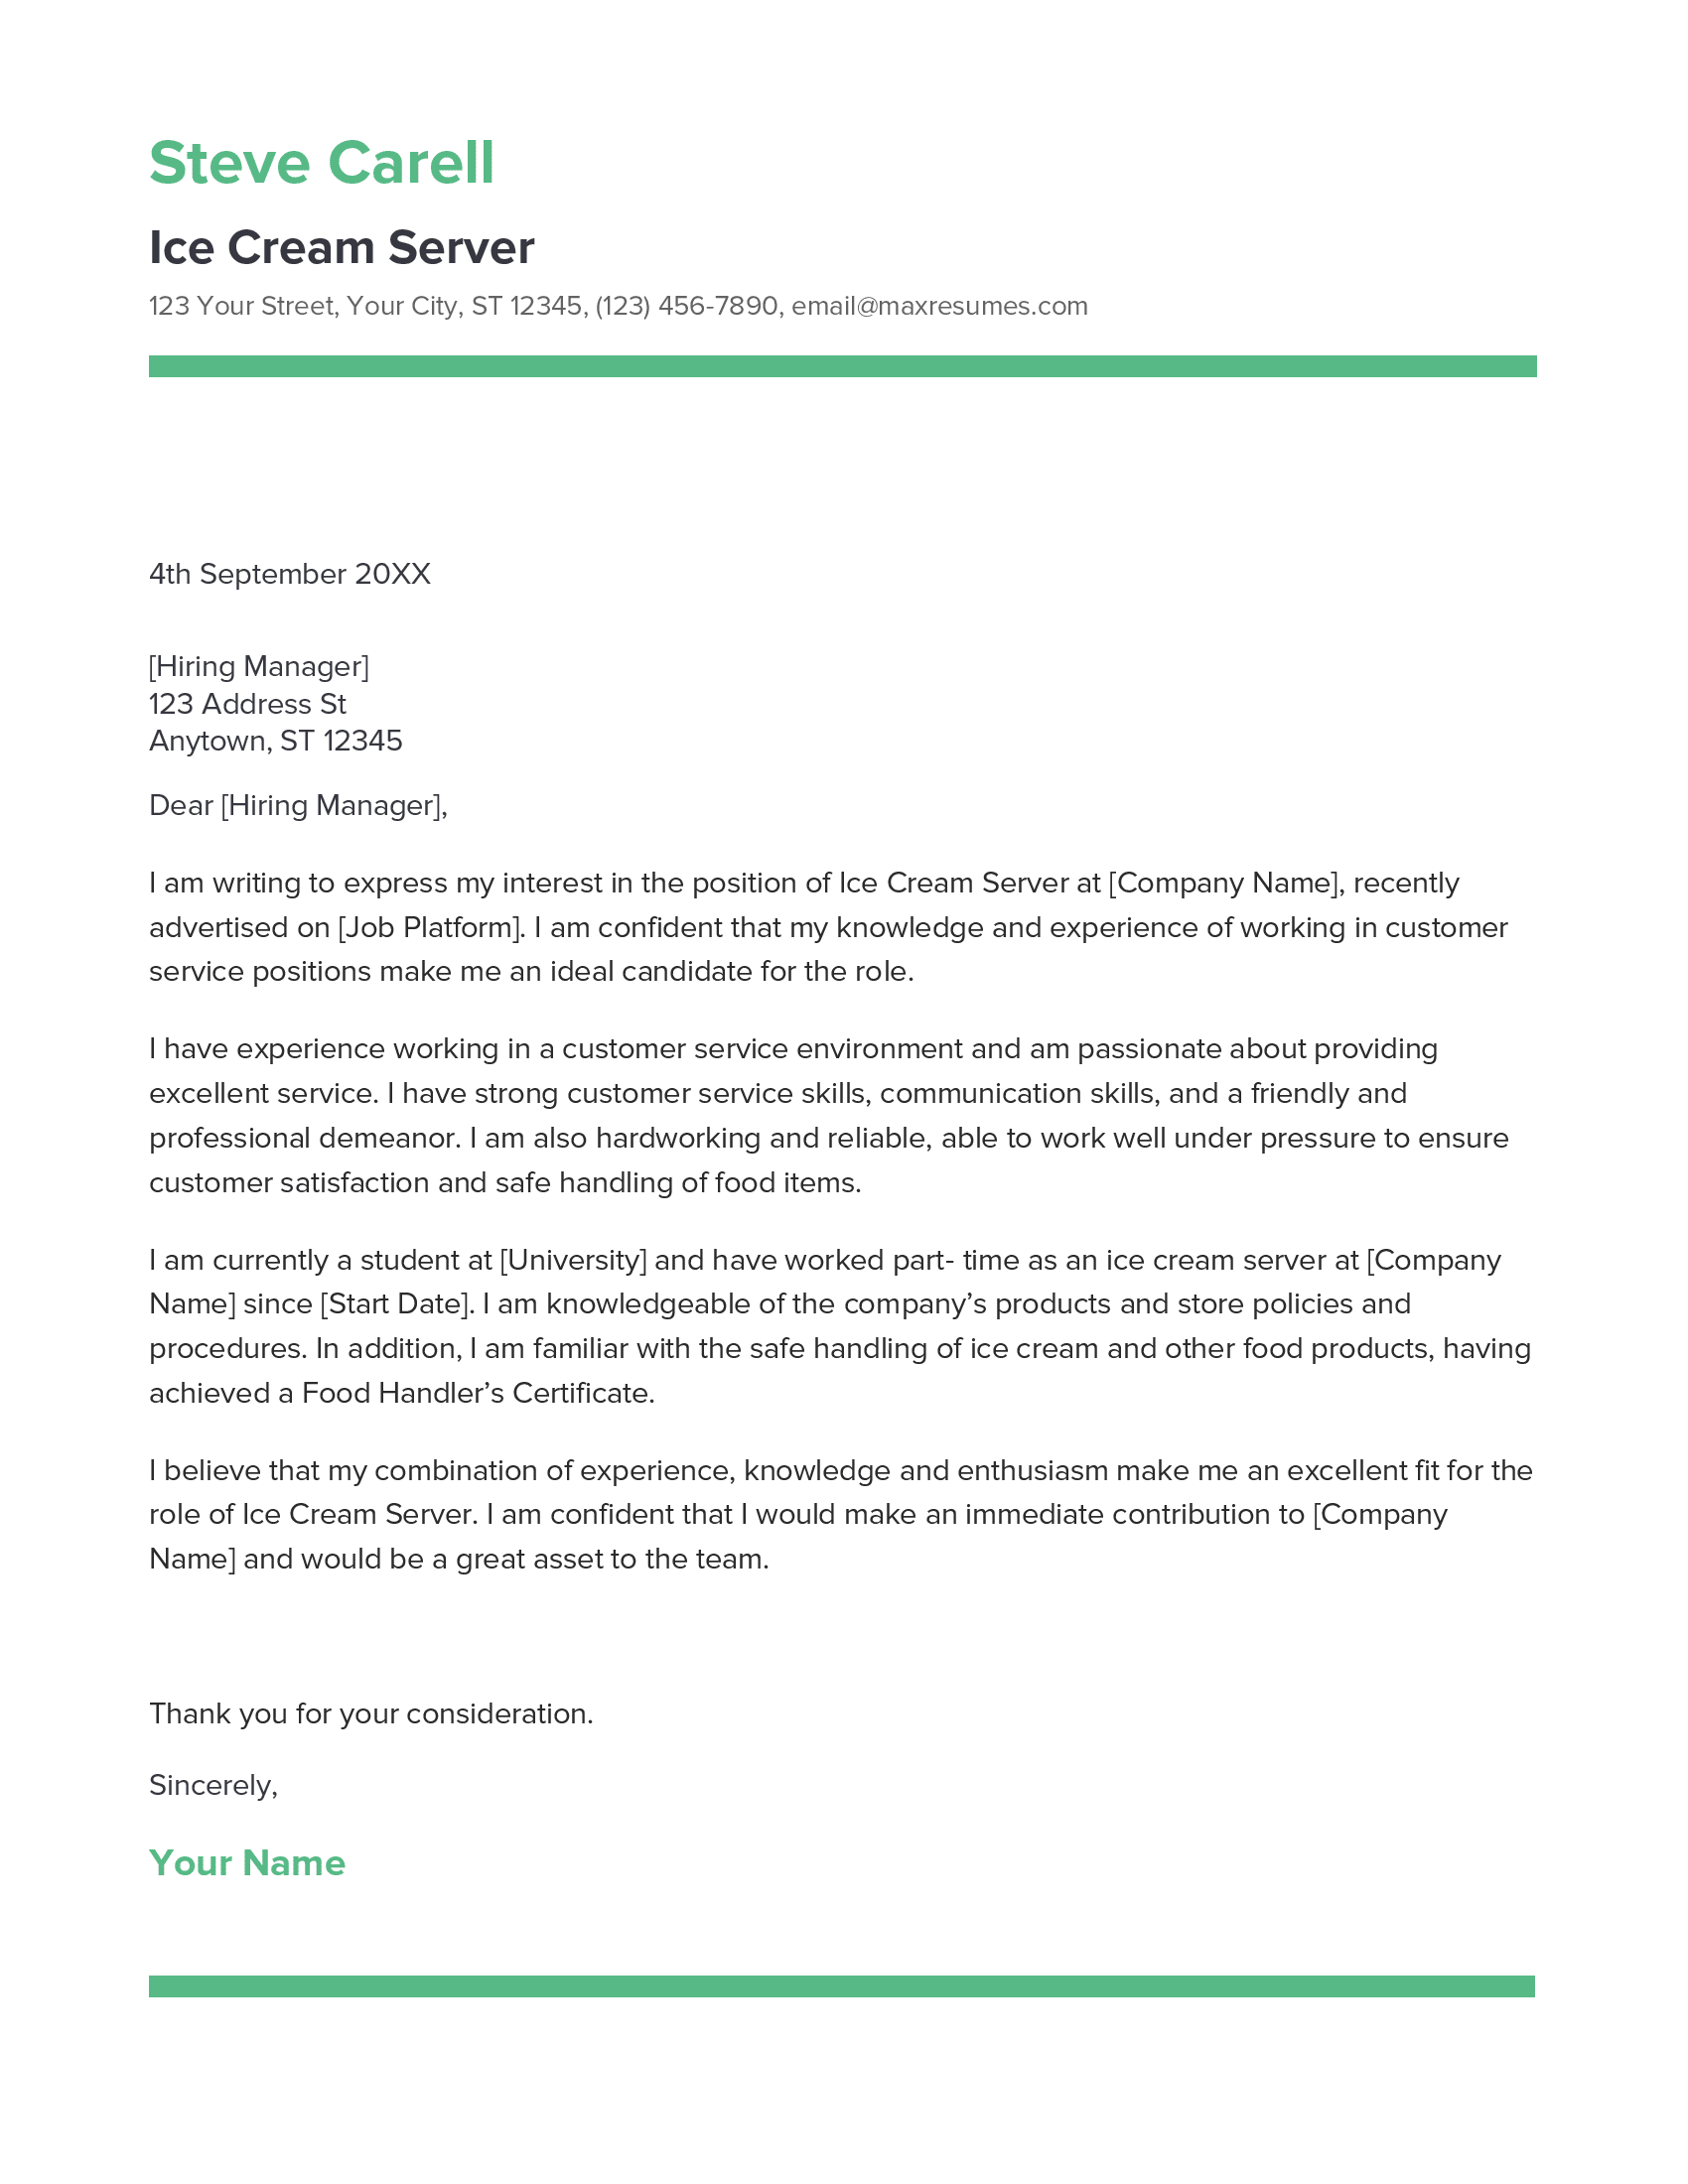 Ice Cream Server Cover Letter Example